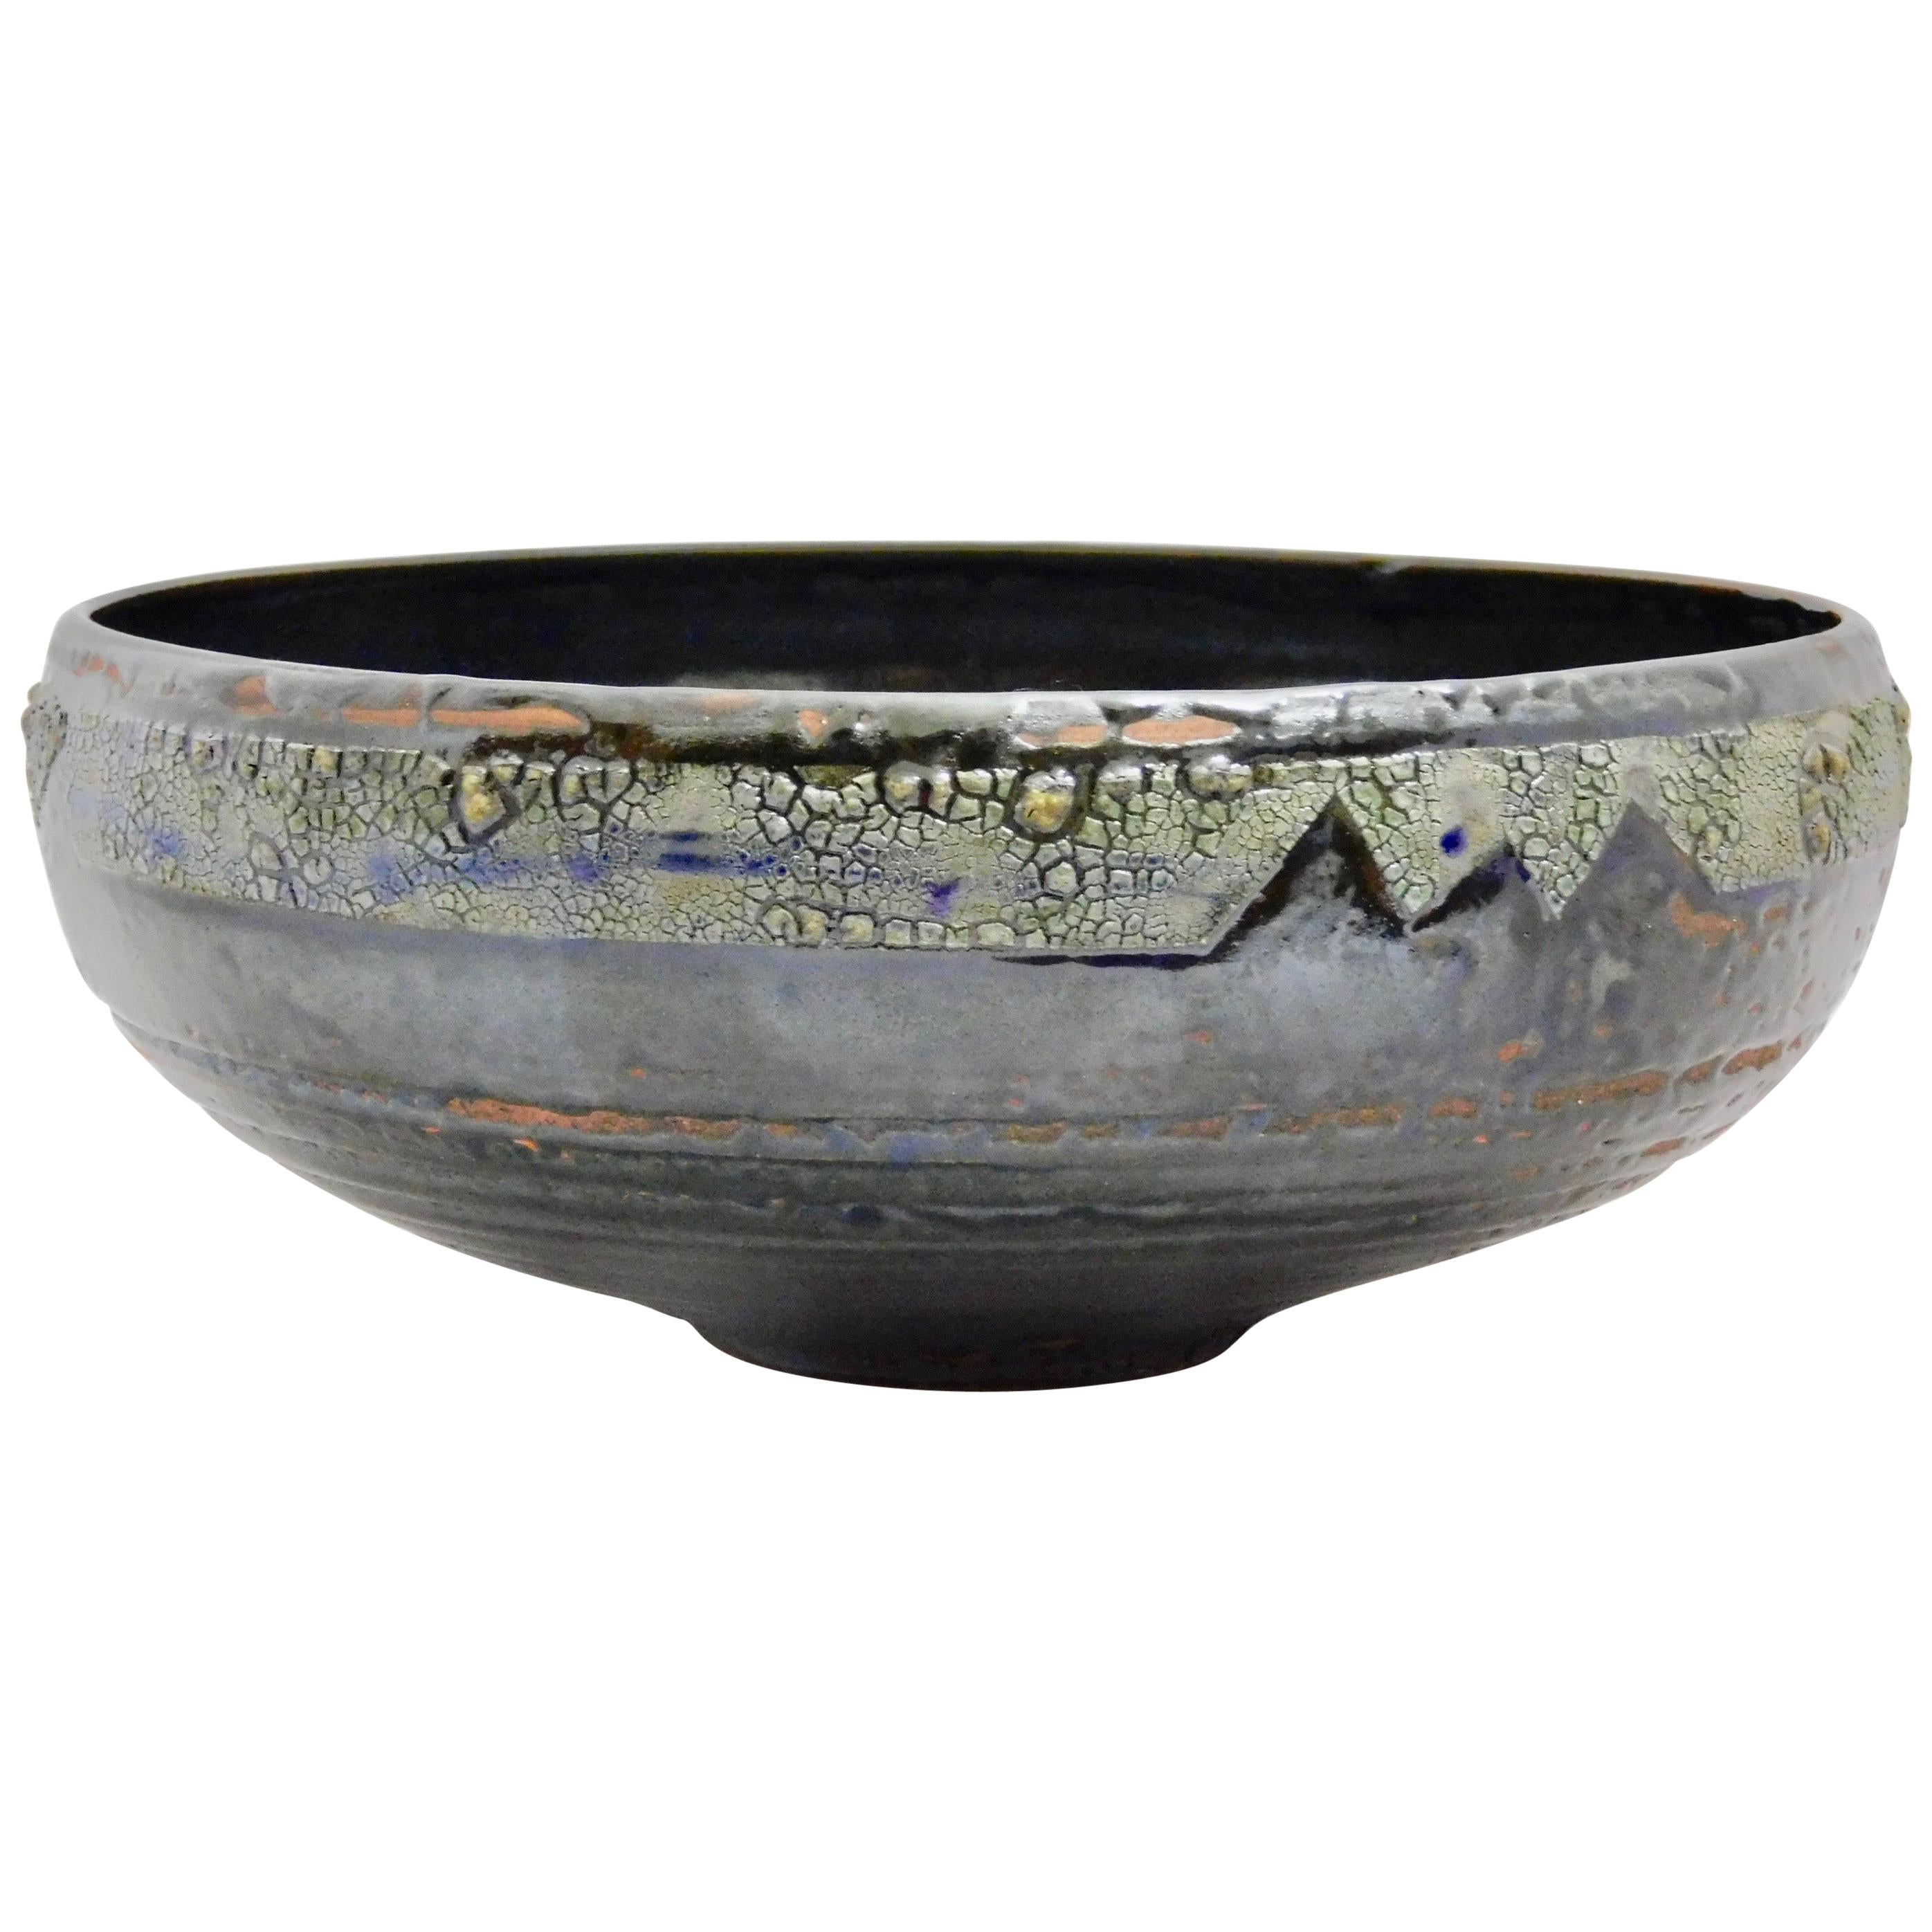 Verkovina wheel thrown earthenware bowl by ceramicist Andrew Wilder.
This is a one of a kind object made in the ancient way- by hand in a small artisanal pottery. In this series Wilder explores the application of lichen under glazes to achieve